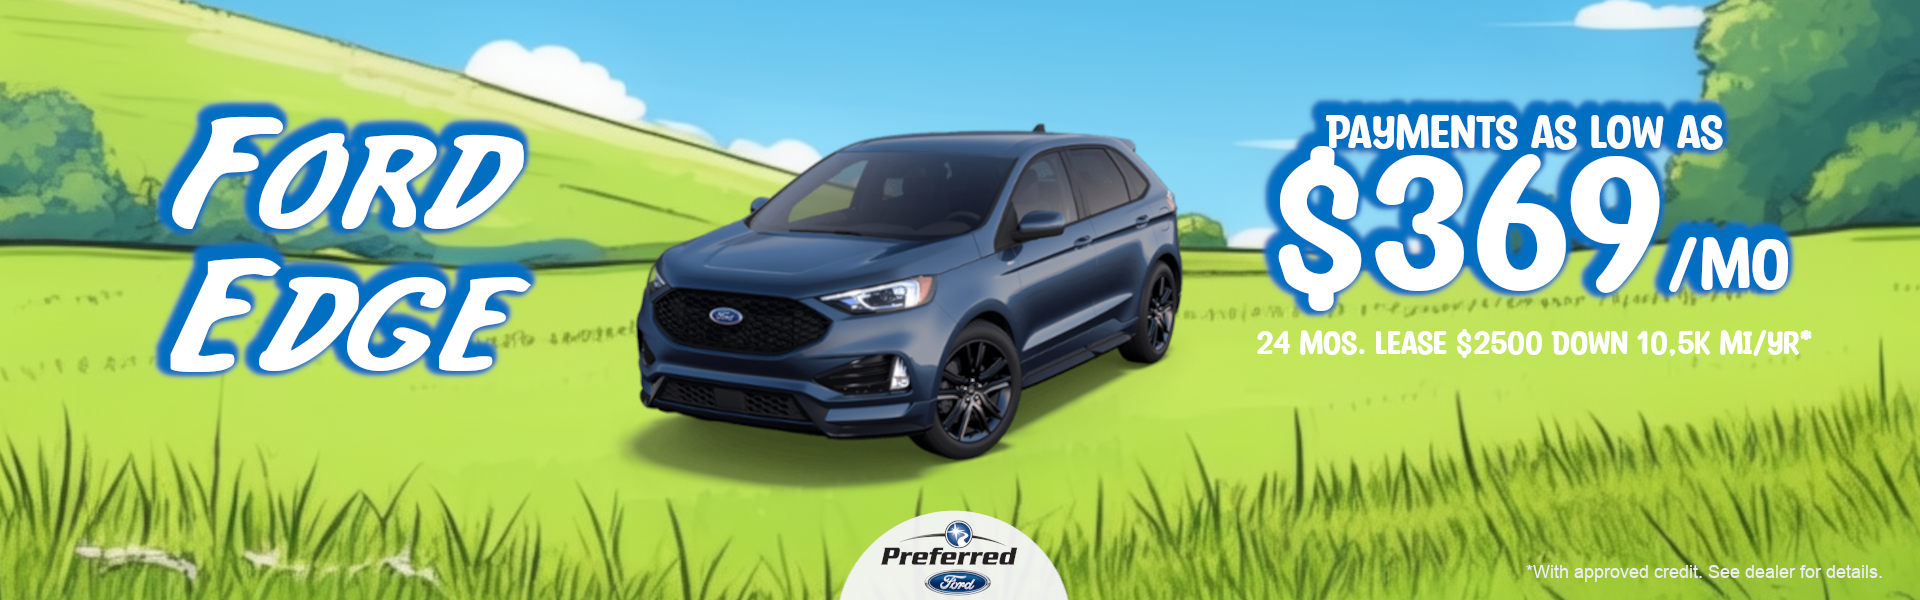 Ford Edge payment as low as $369 month